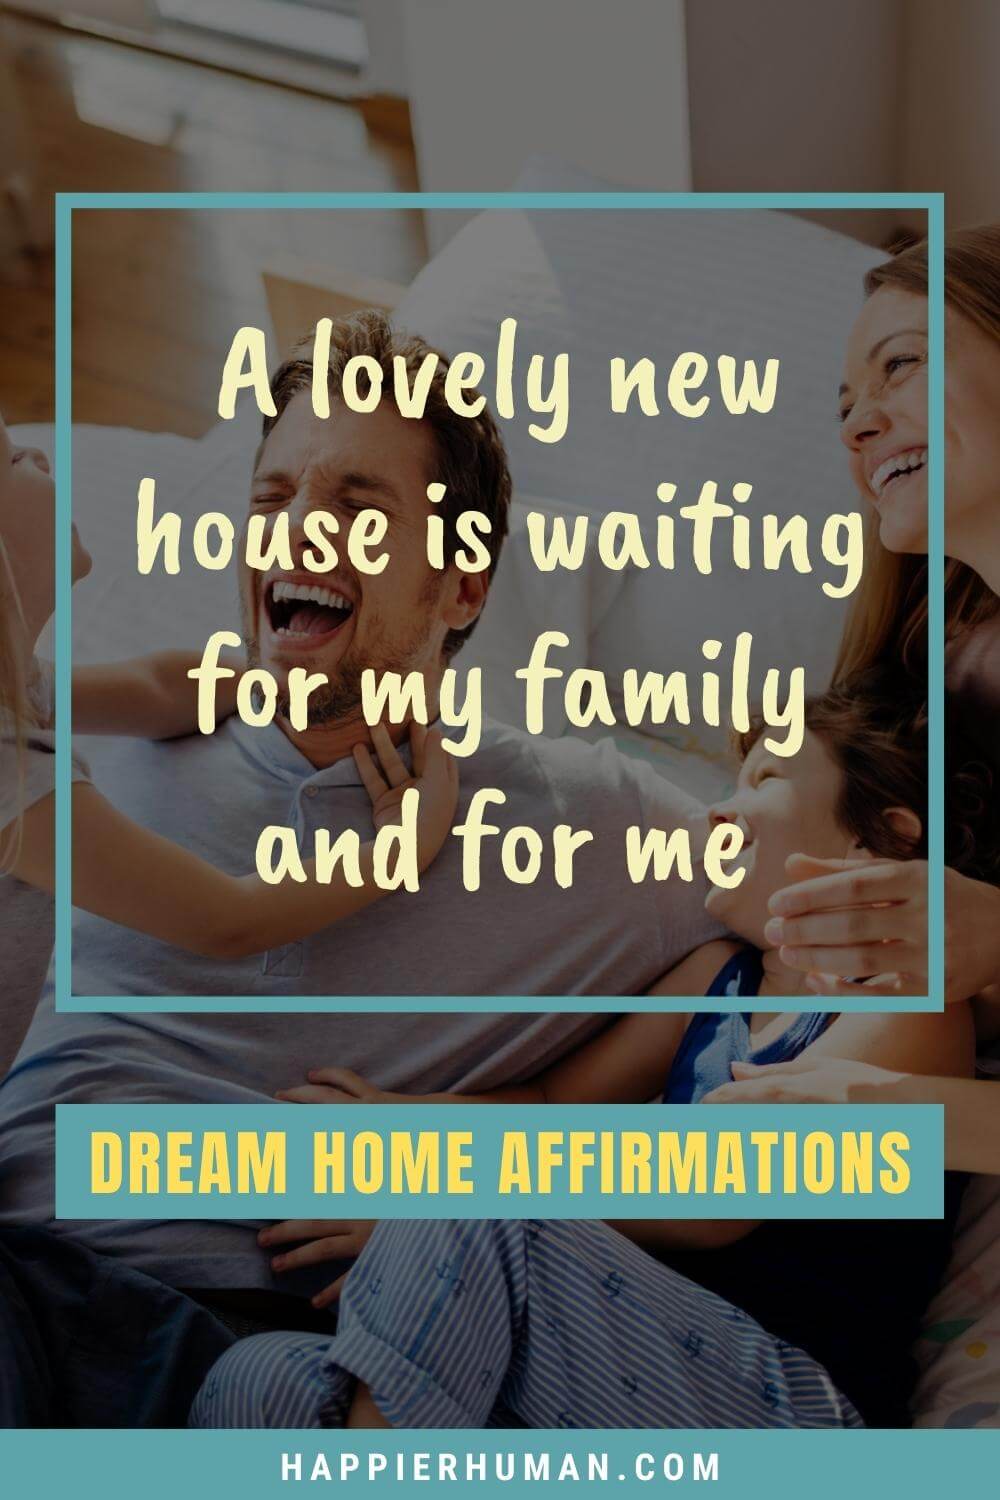 Dream Home Affirmations - A lovely new house is waiting for my family and for me | how to manifest a house 369 method | how to manifest a new home quickly | manifesting a new home with no money